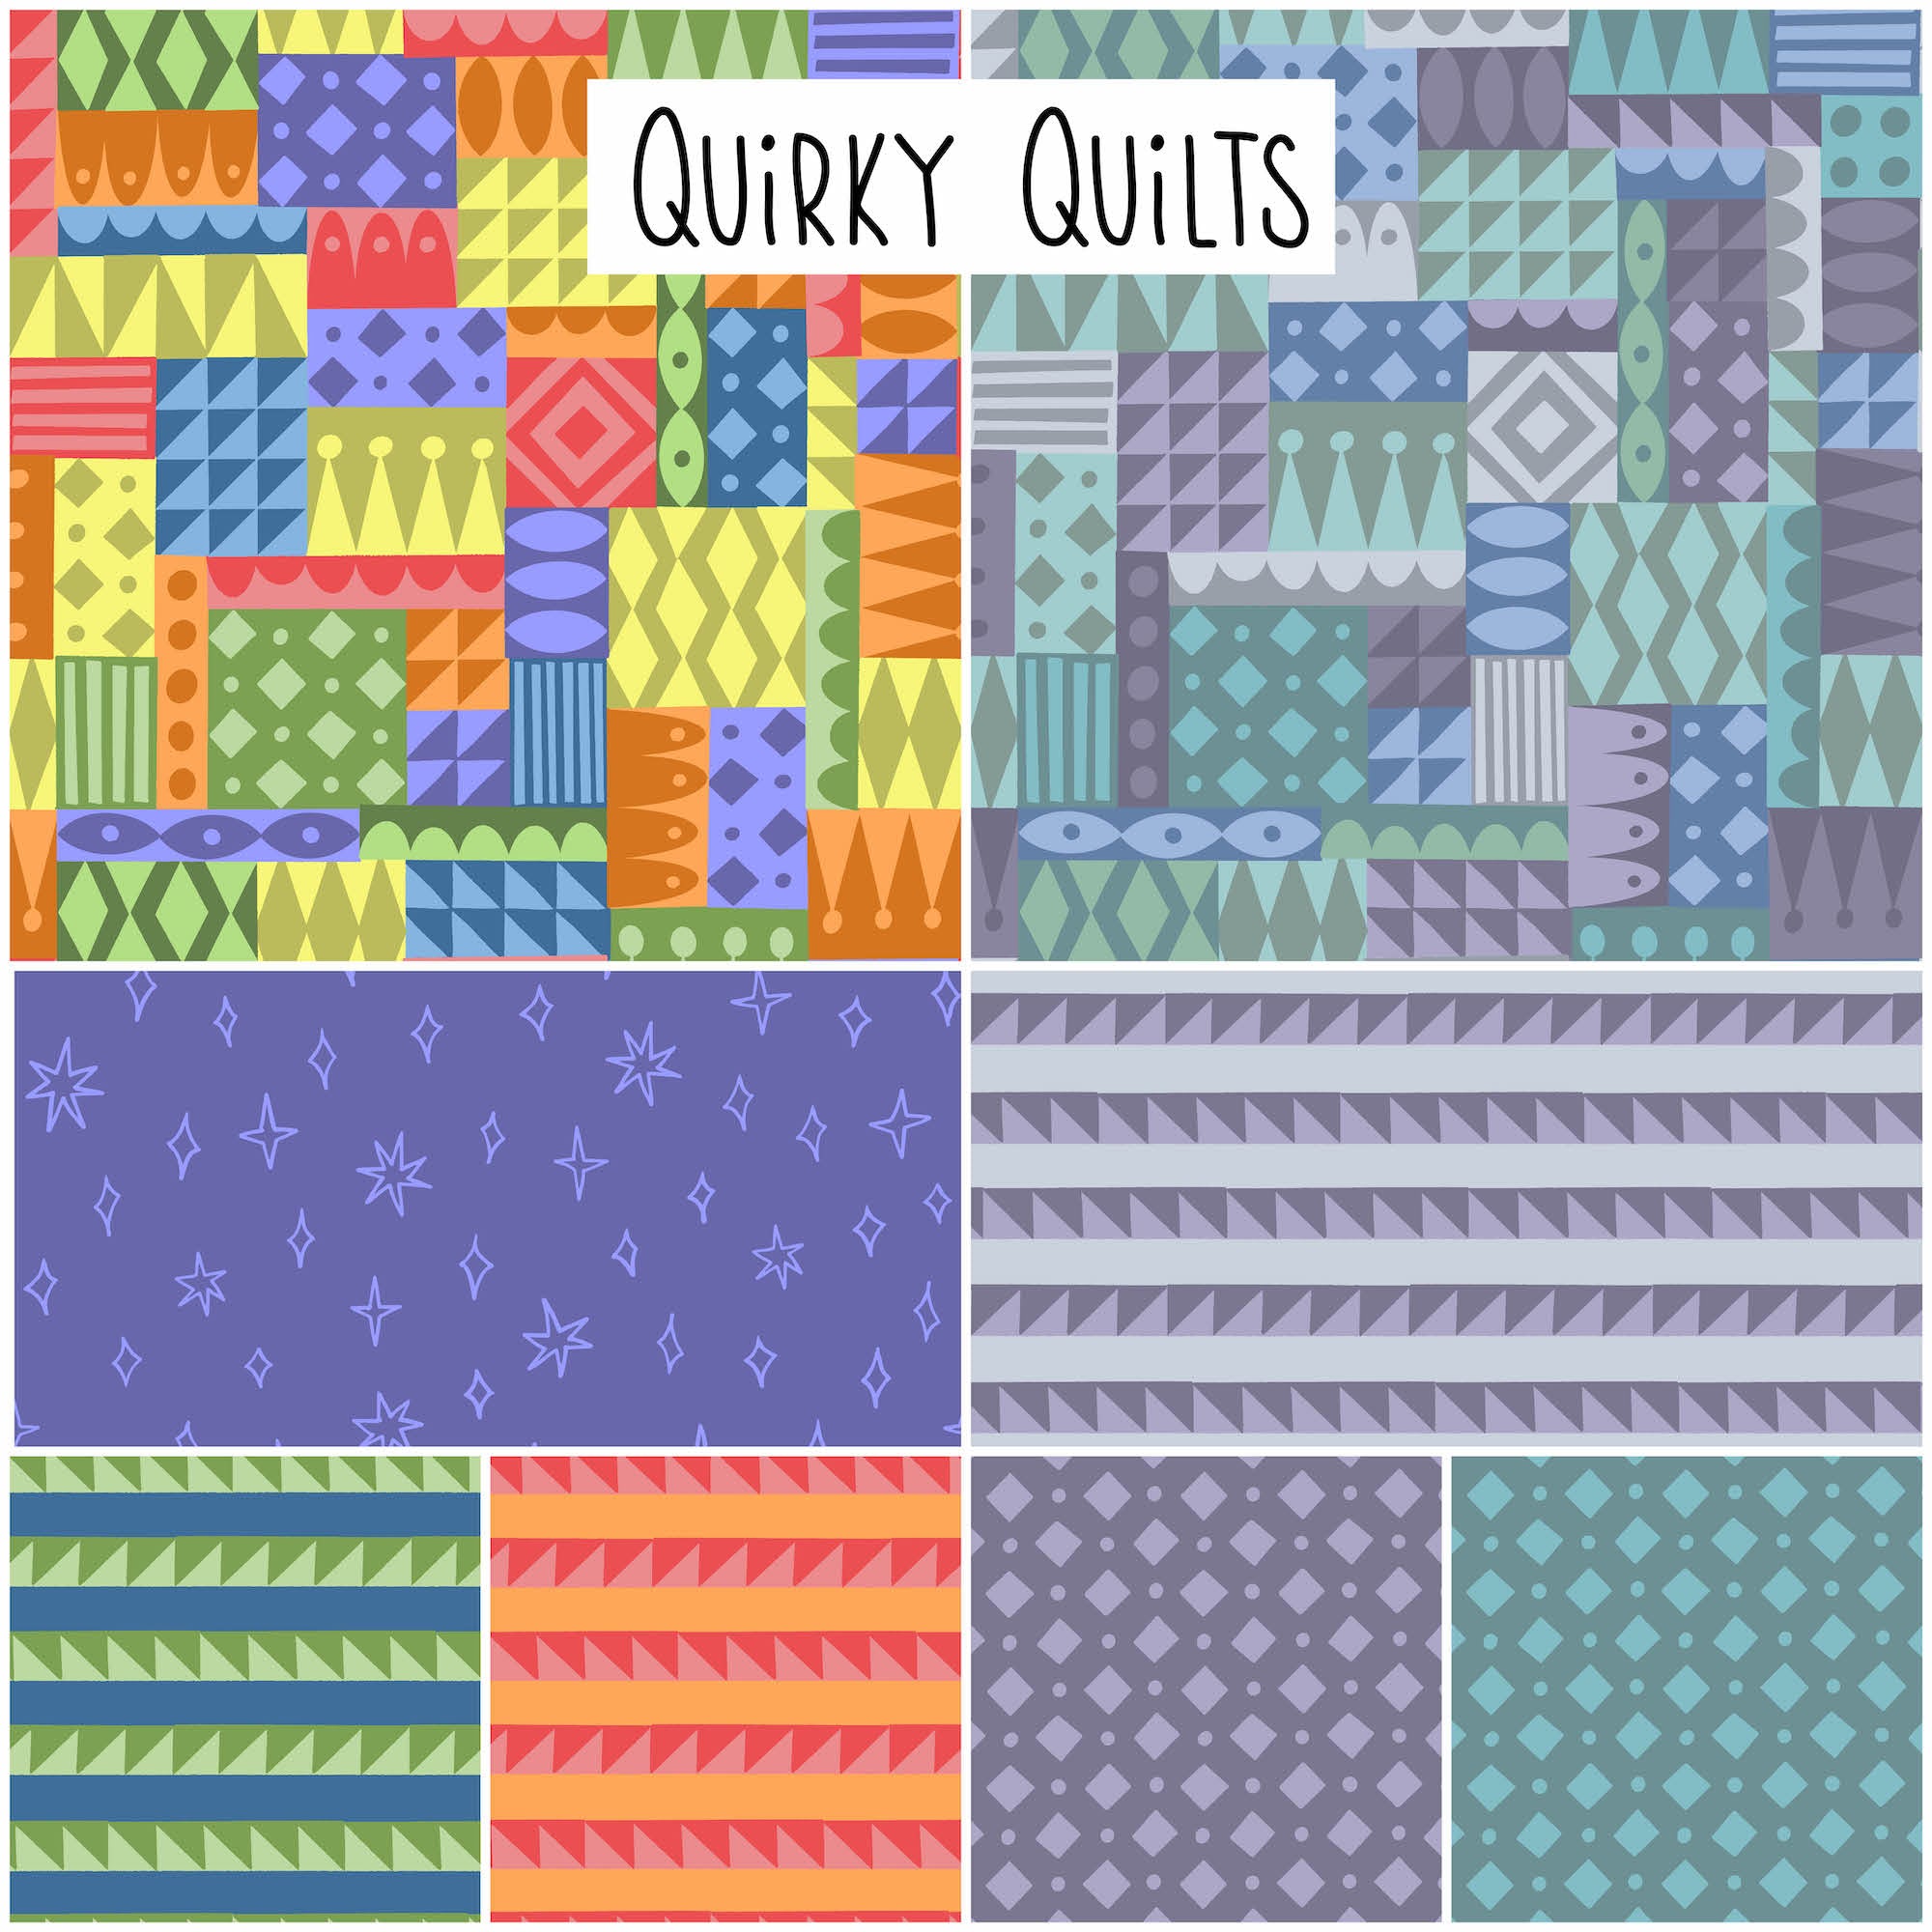 Quirky Quilts - Mini Fabric Collection